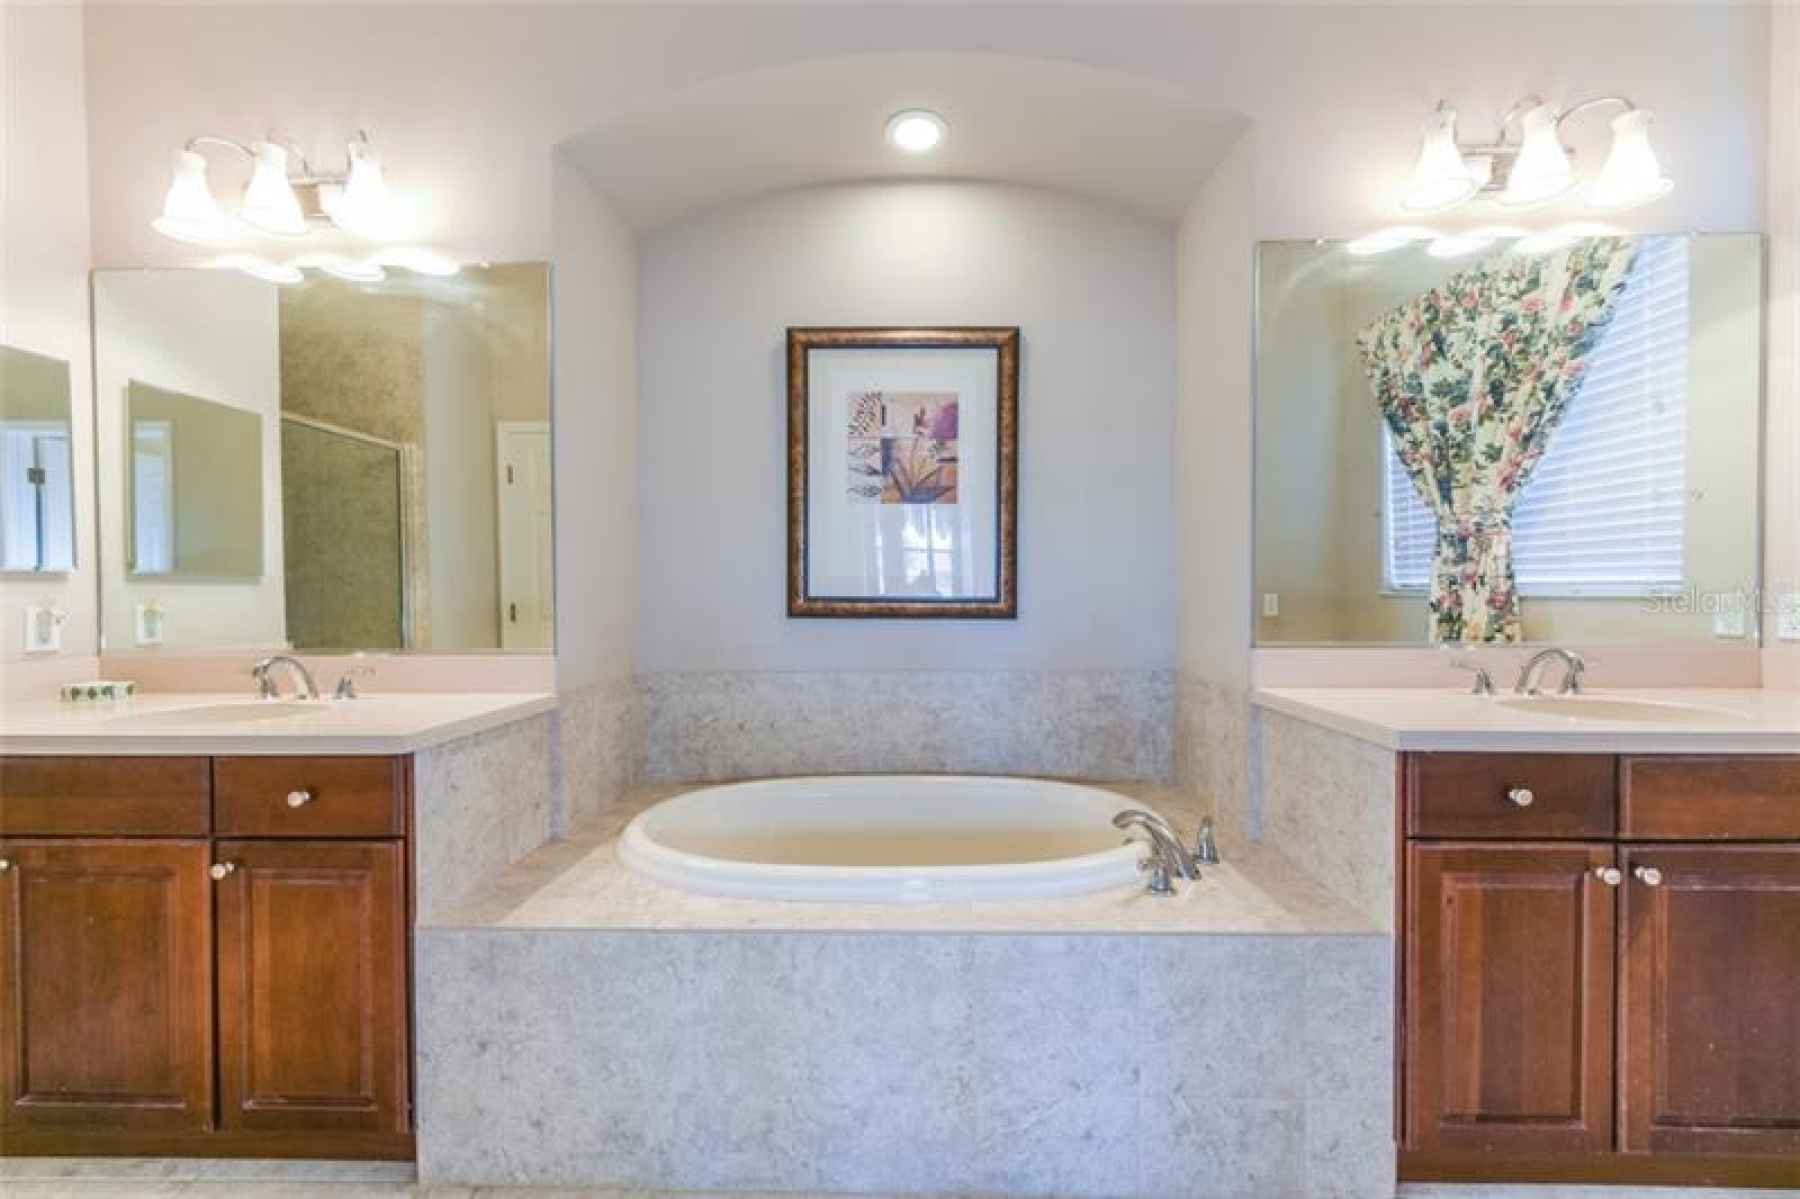 Master Bath with Dual Vanities and Garden Tub